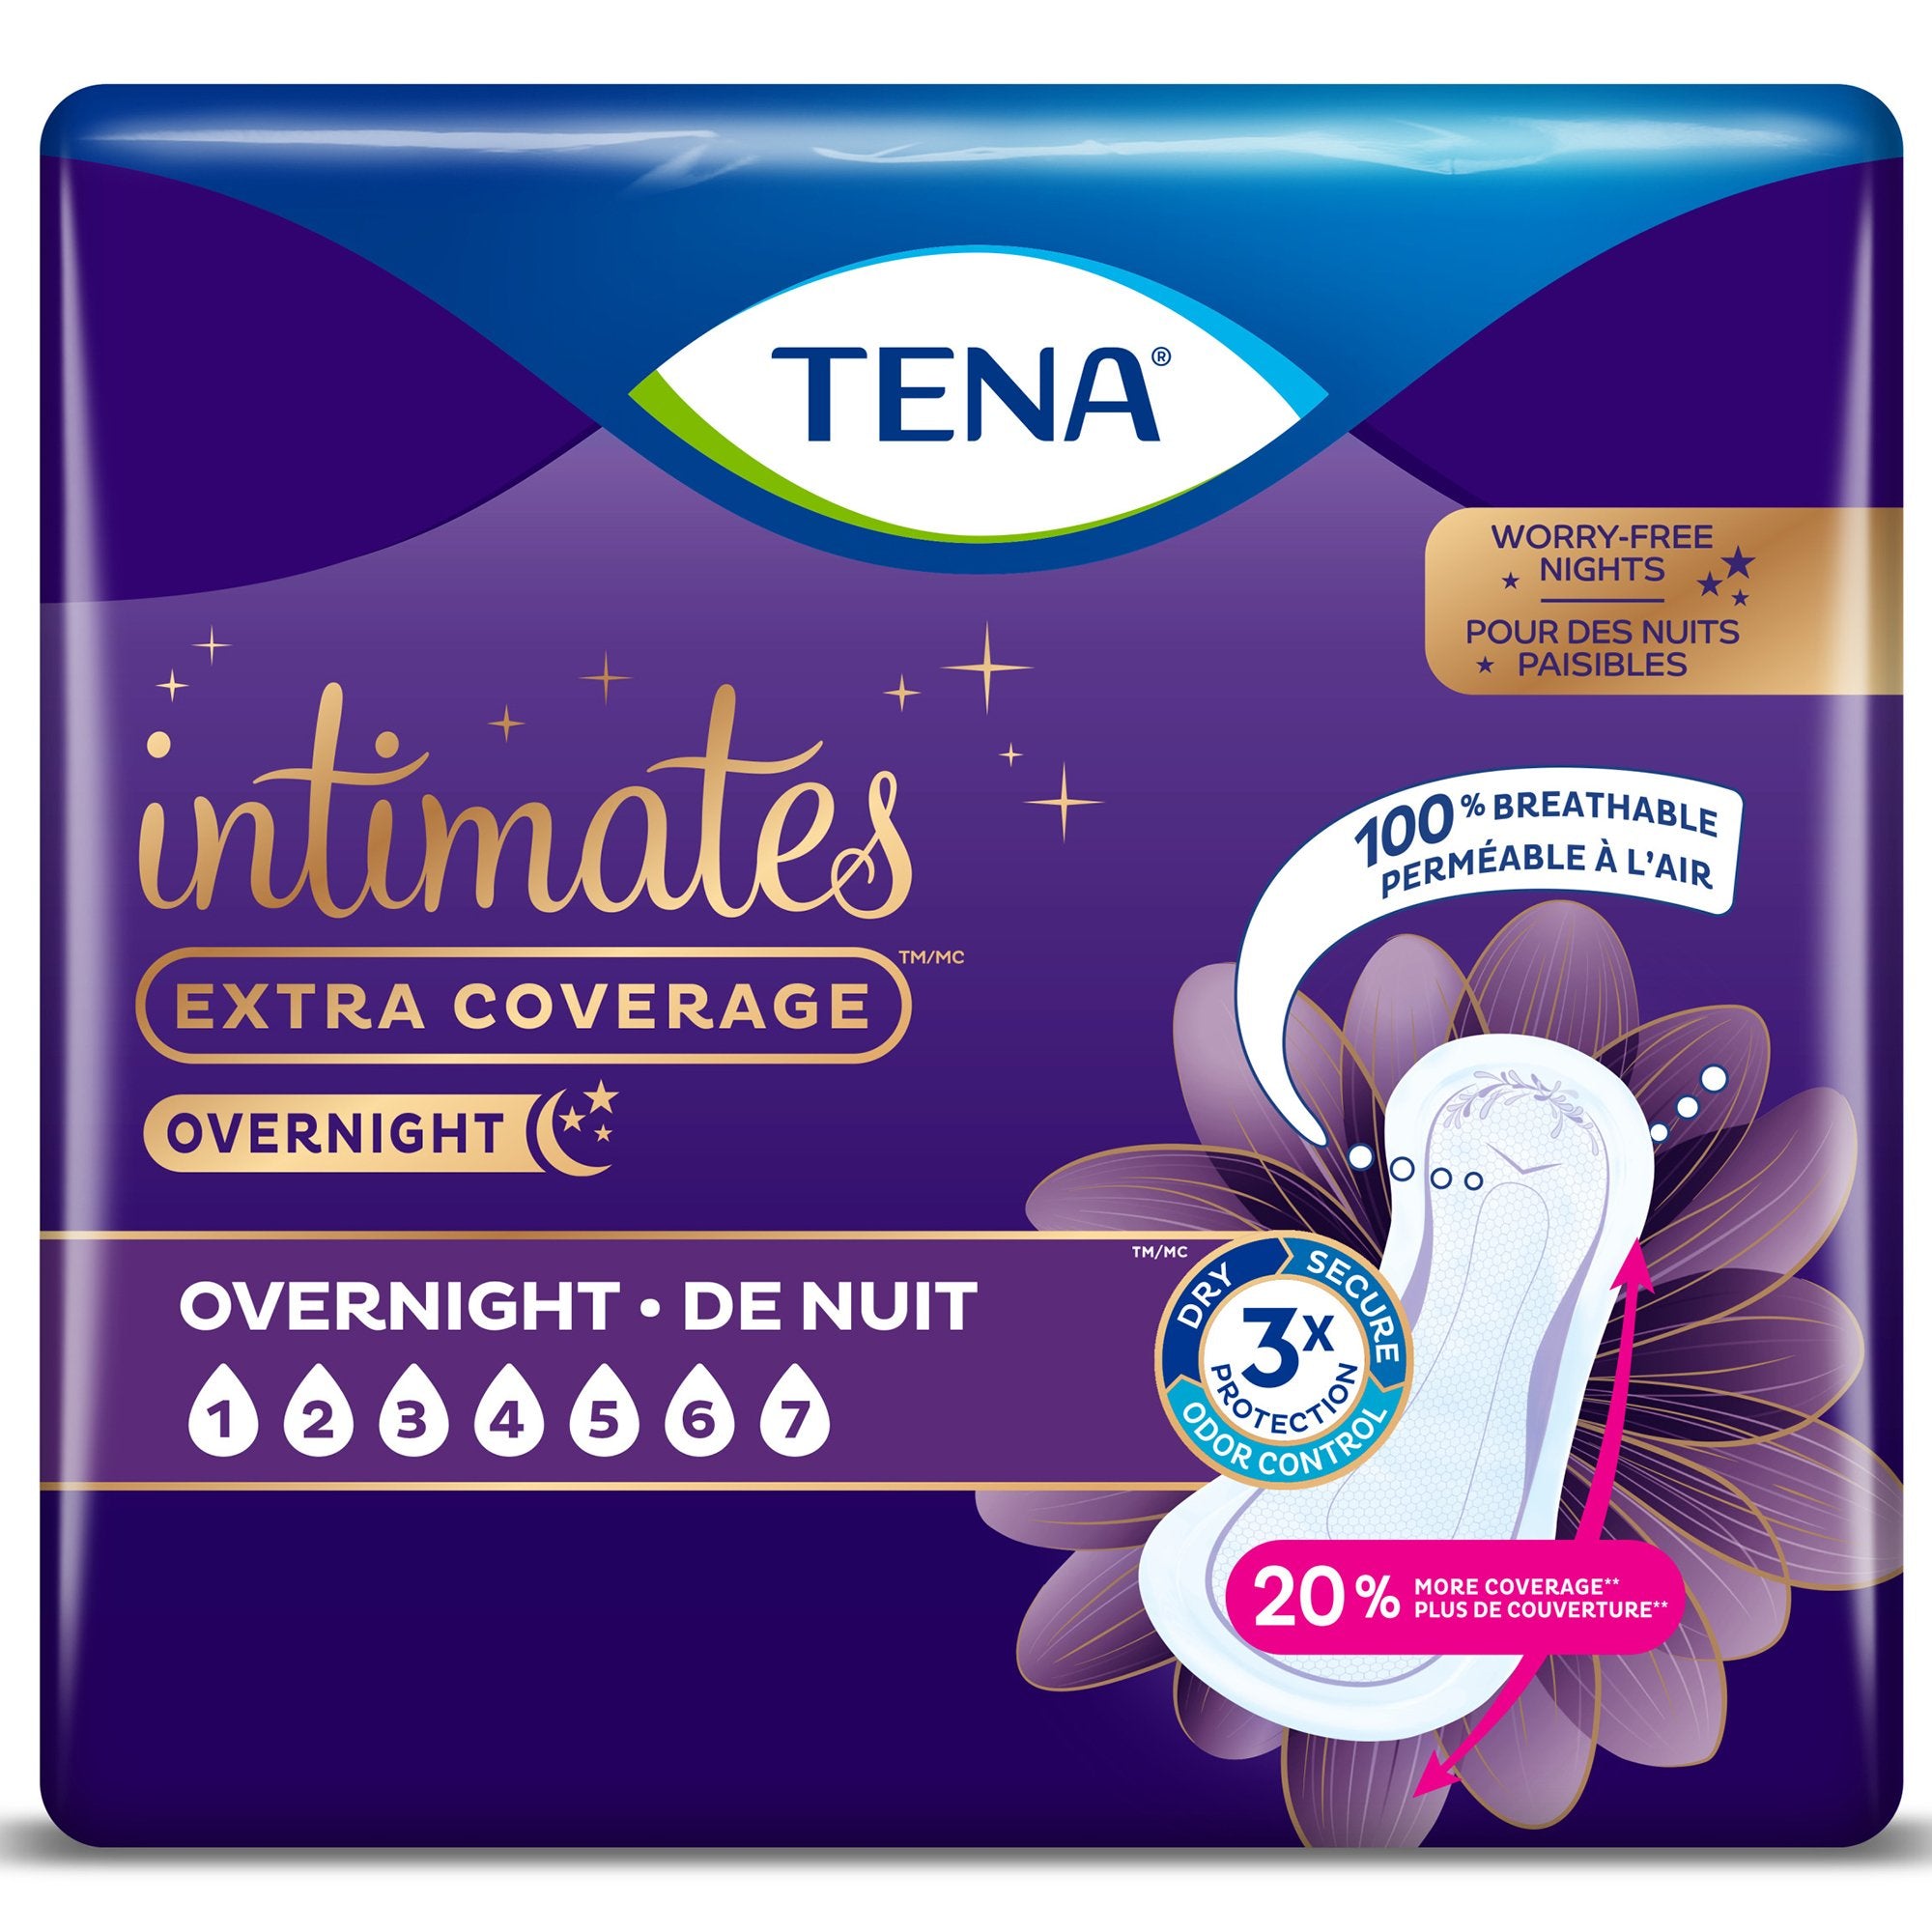 Bladder Control Pad TENA Intimates Overnight 16 Inch Length Heavy Absorbency Superabsorbant Core One Size Fits Most